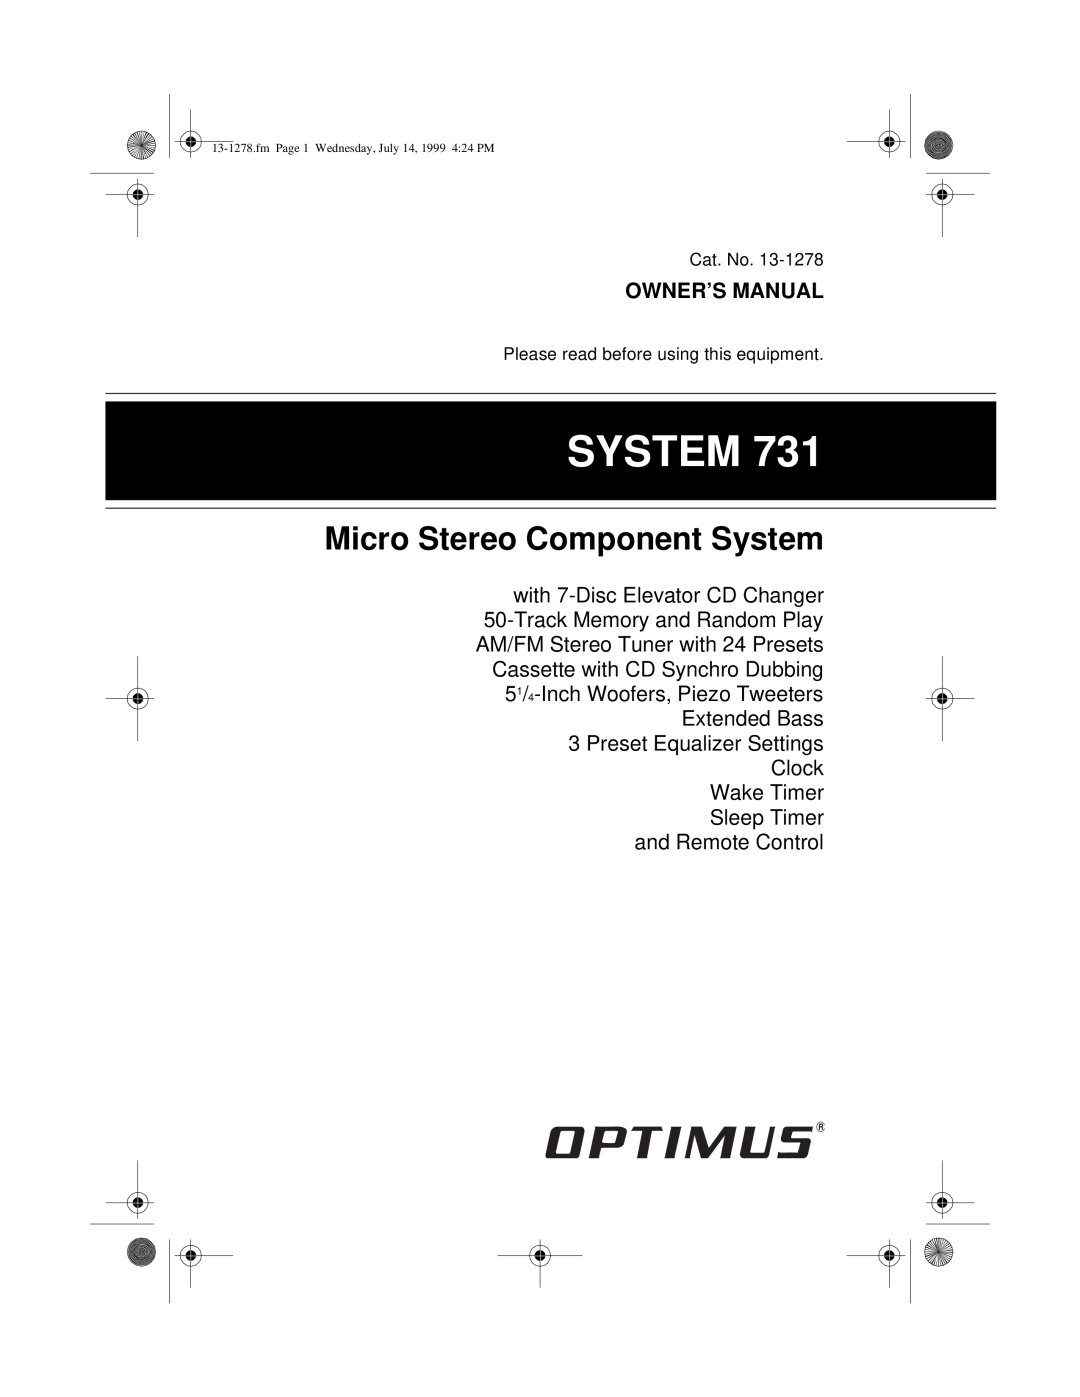 Optimus 731 owner manual Micro Stereo Component System, and Remote Control, fmPage 1 Wednesday, July 14, 1999 4 24 PM 